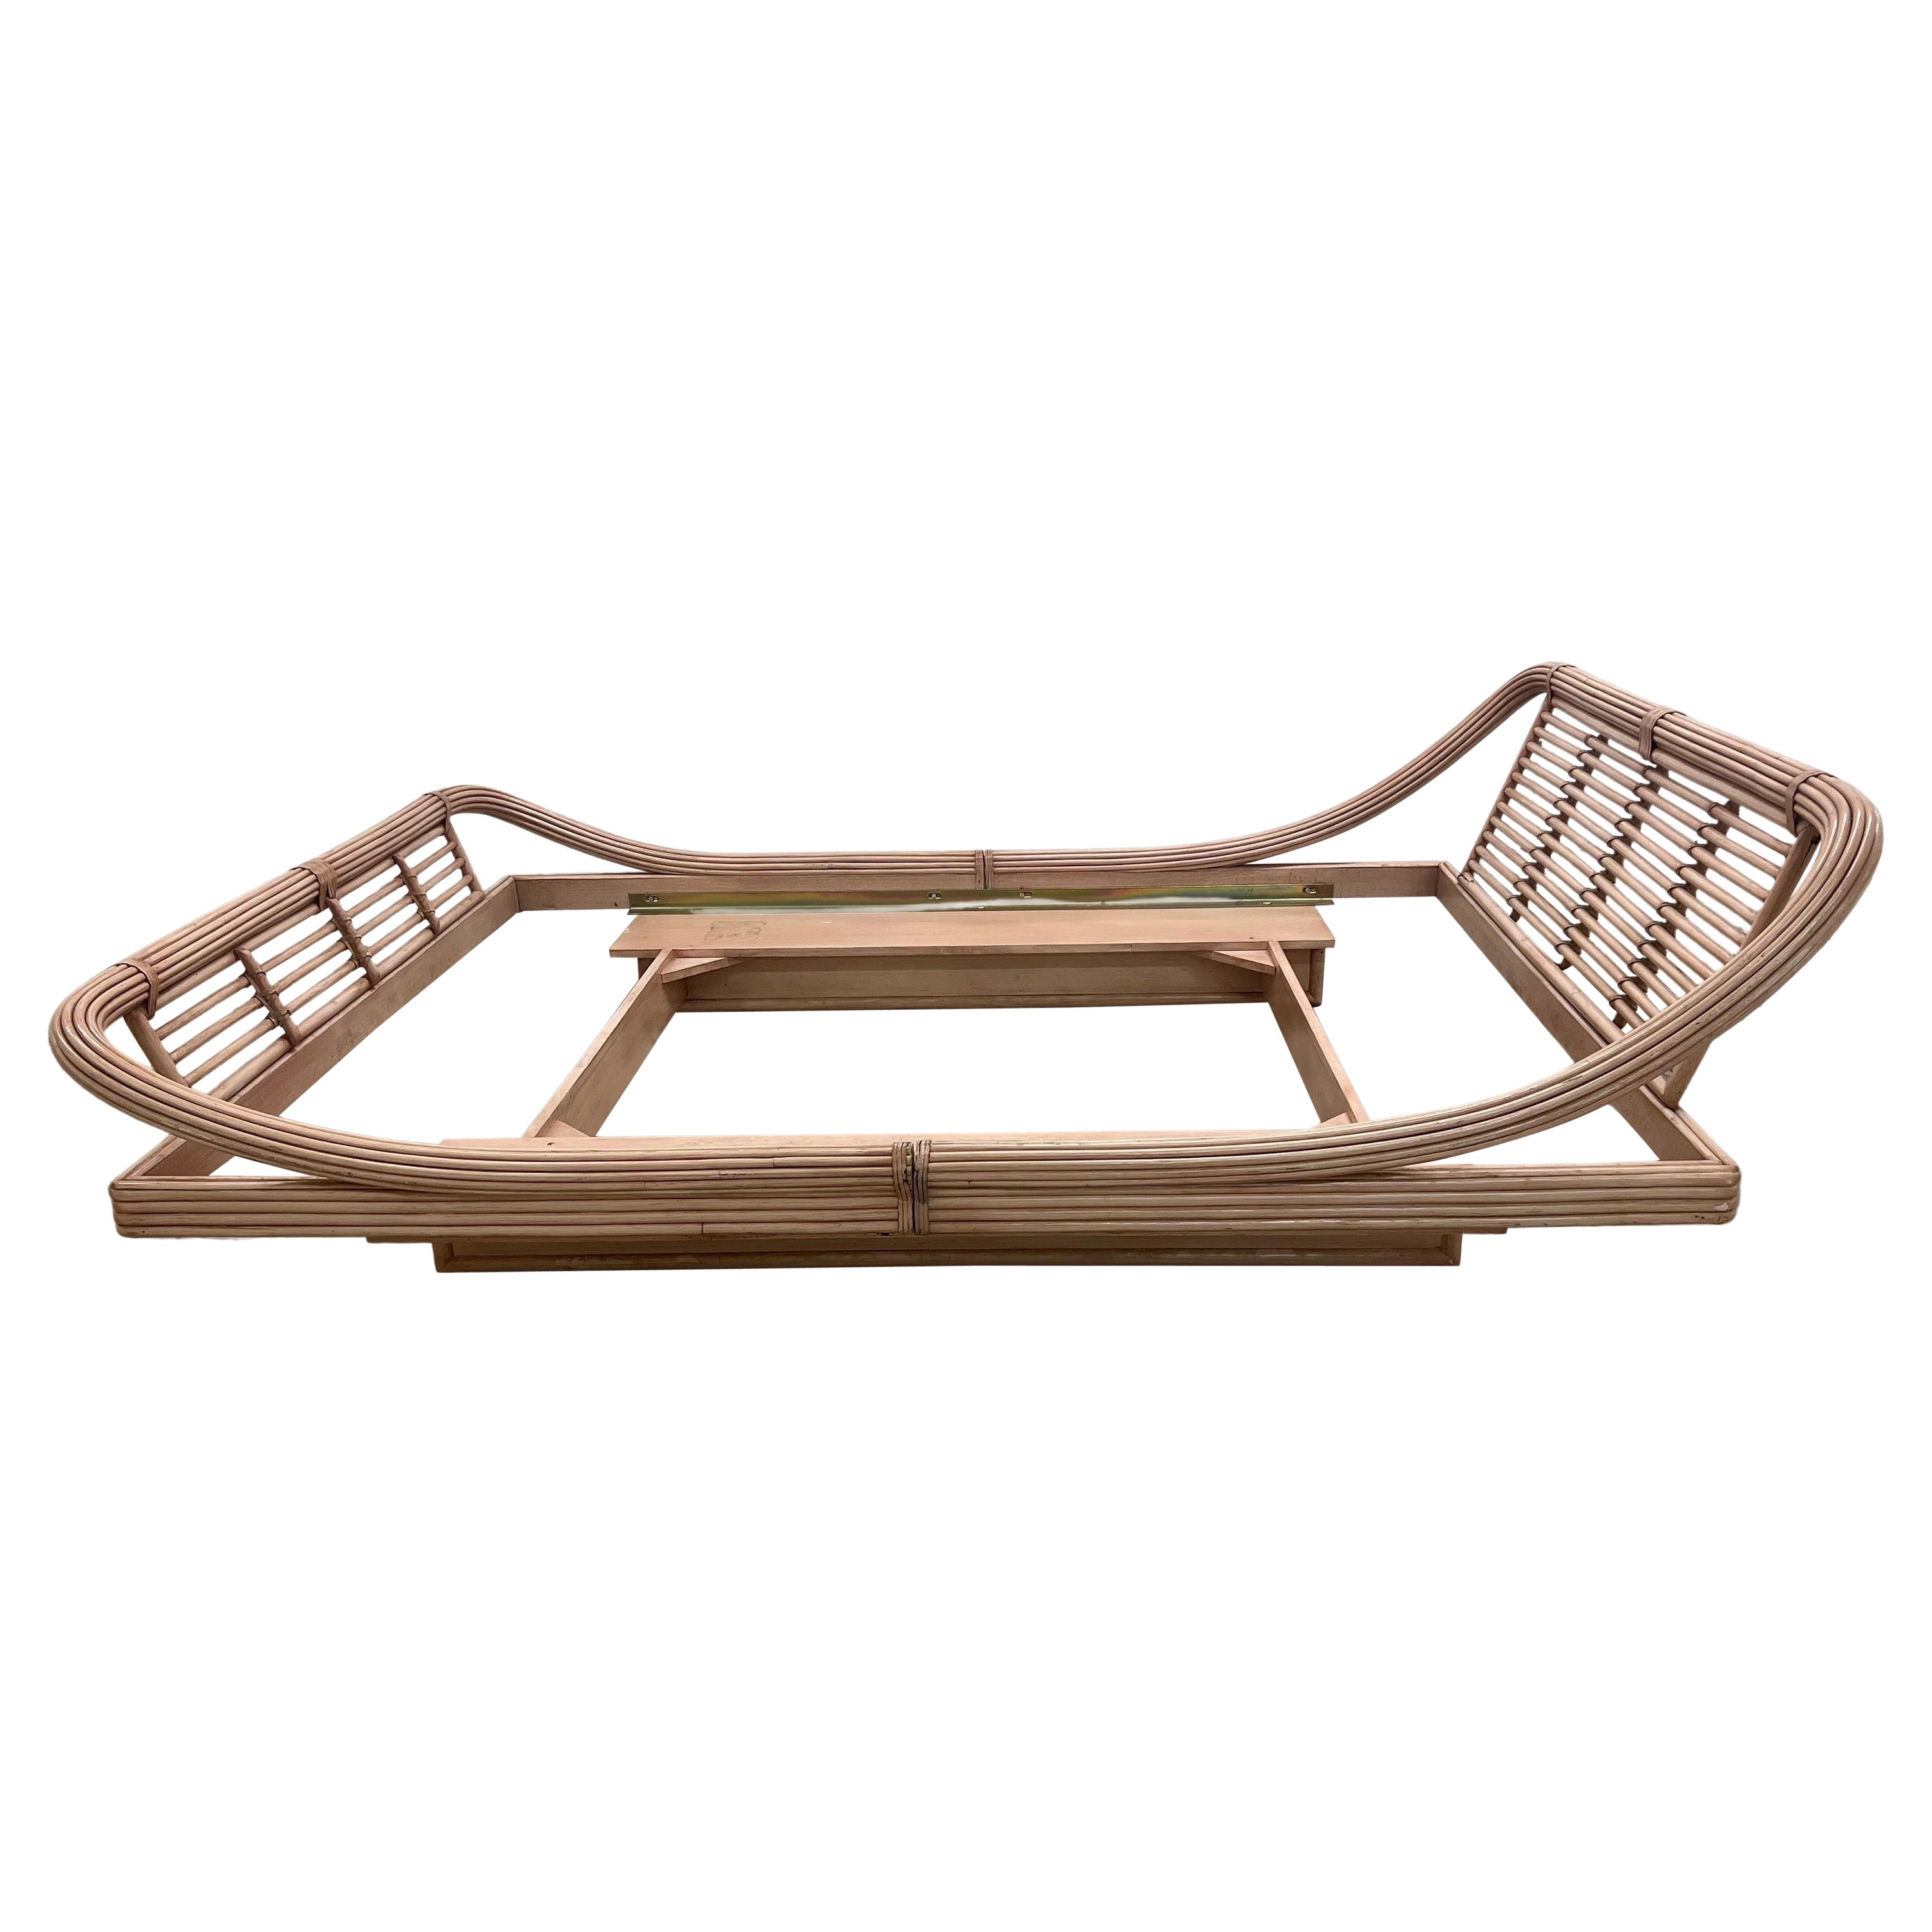 Rare Platform Rattan Bed by Roche Bobois 1980s by Maugrion France For Sale